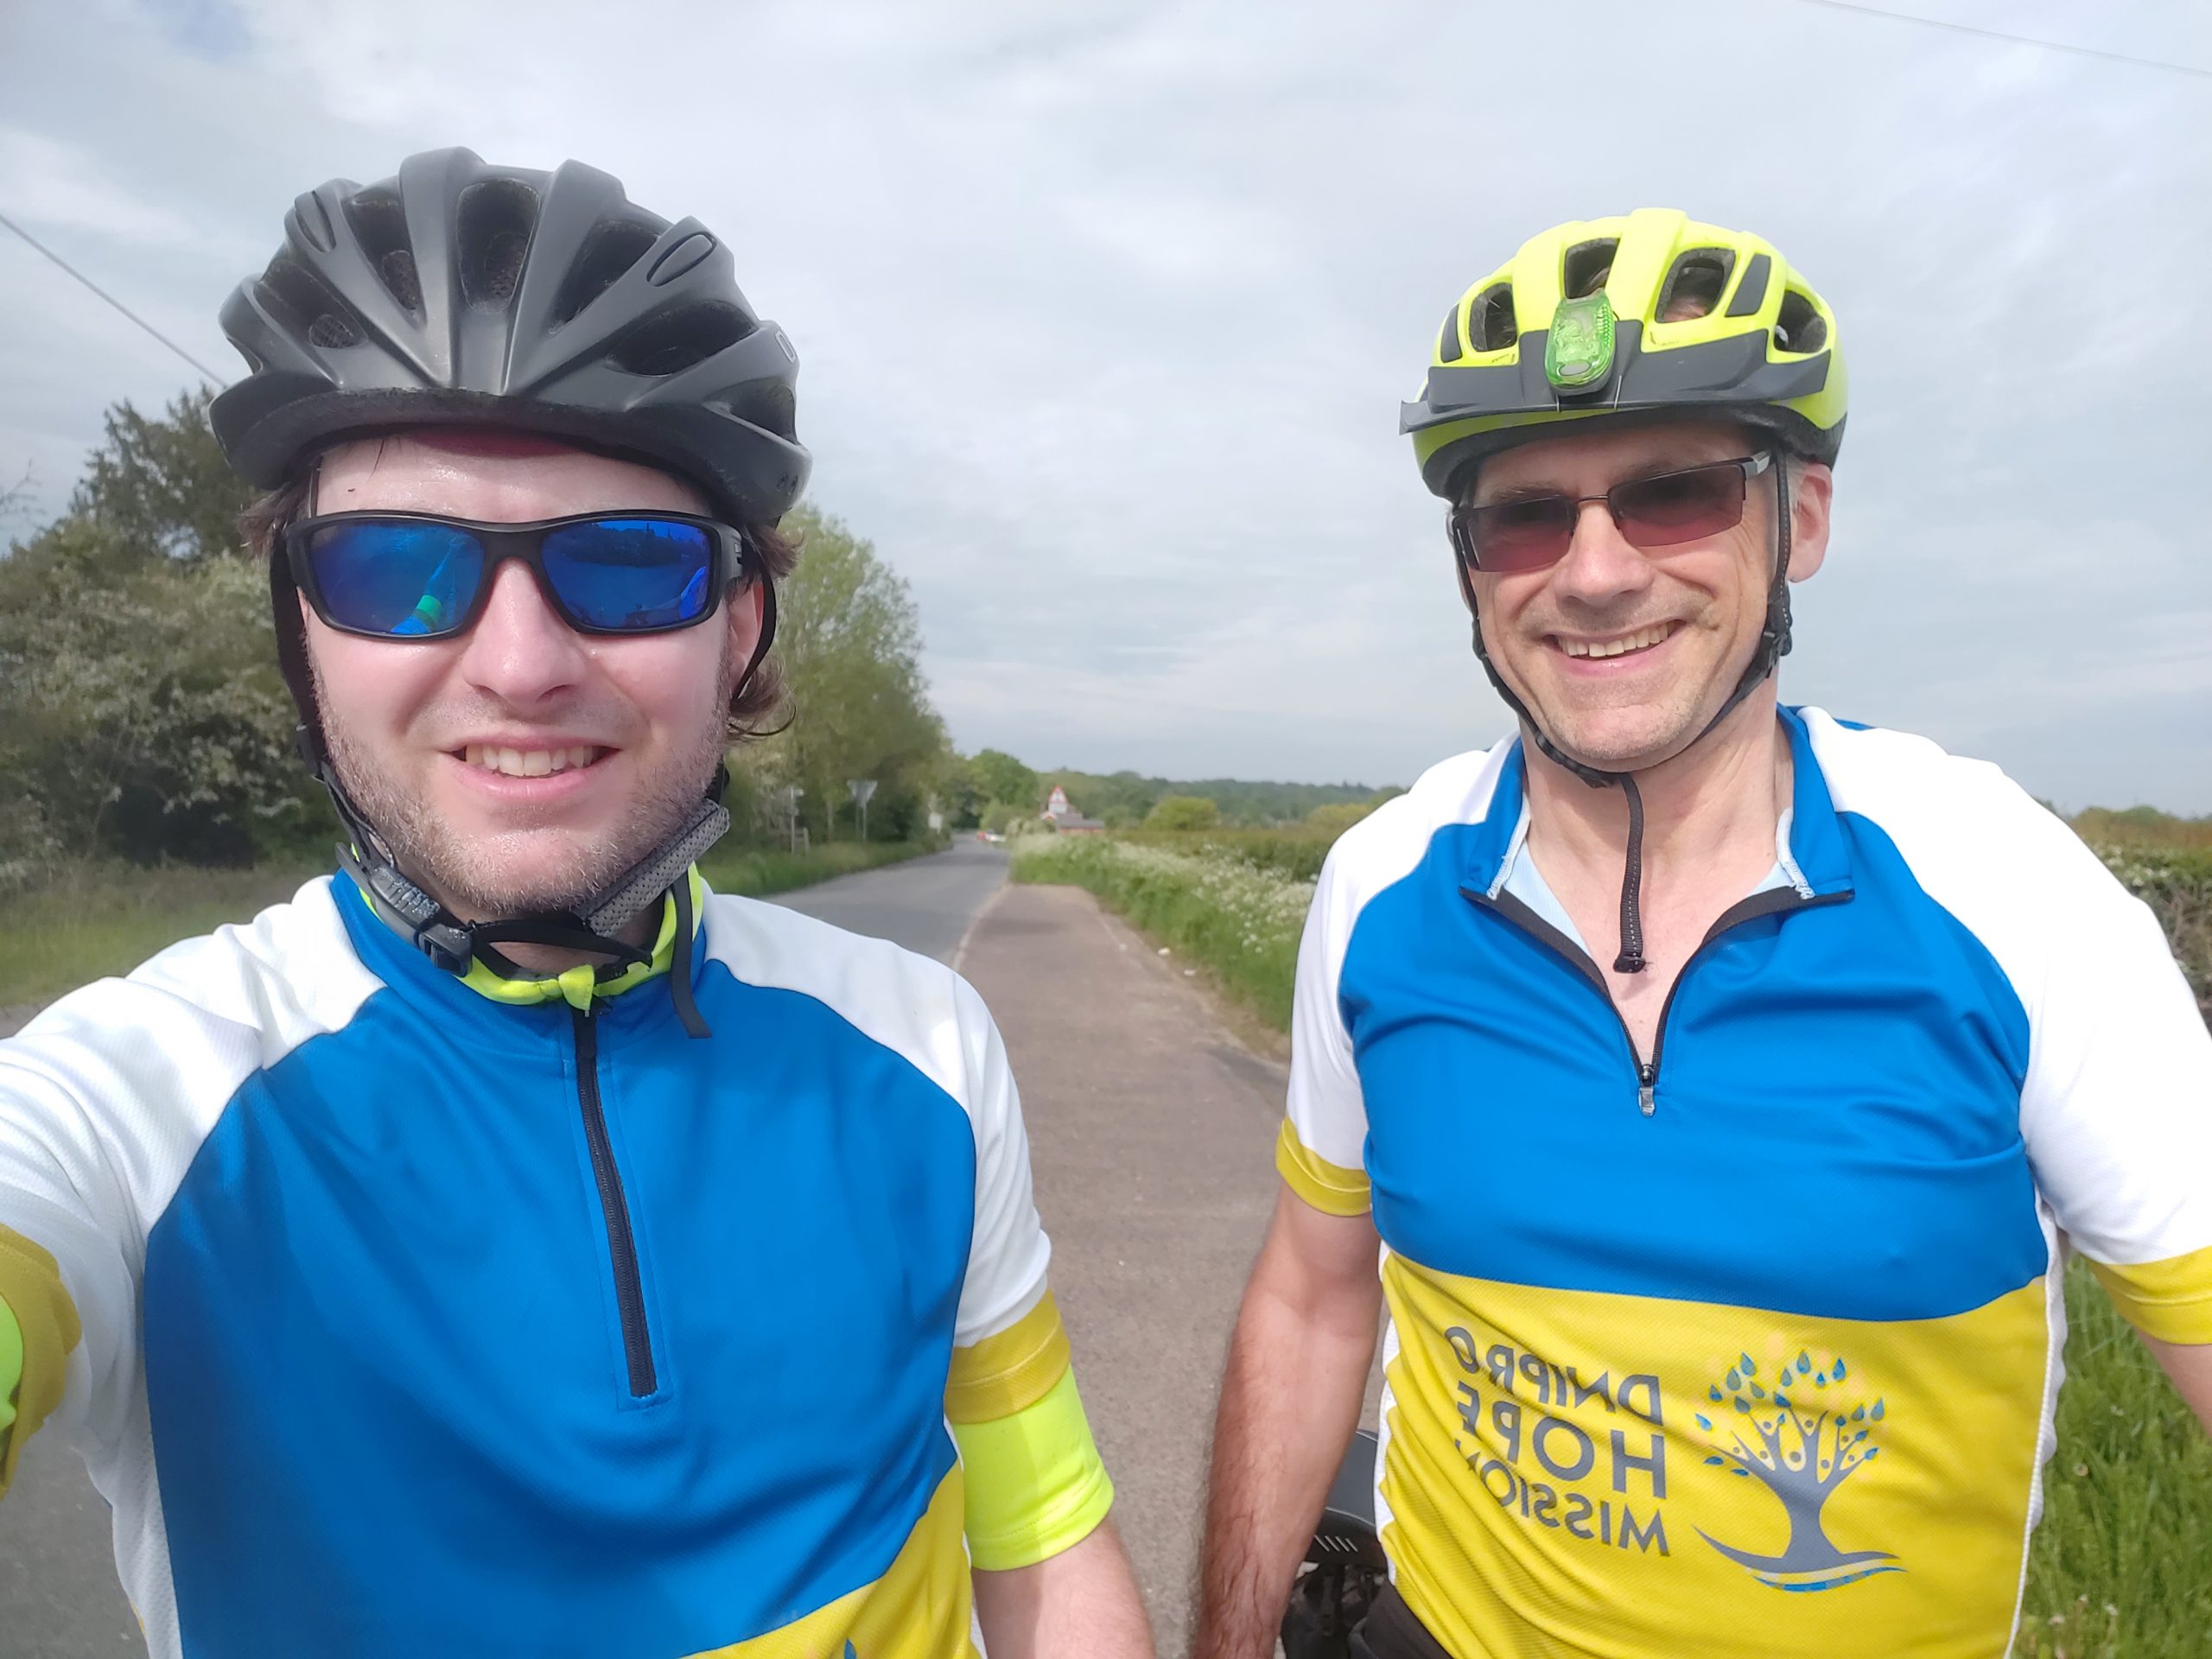 £7,905 Raised from COVID-19 Relief Cycle Challenge